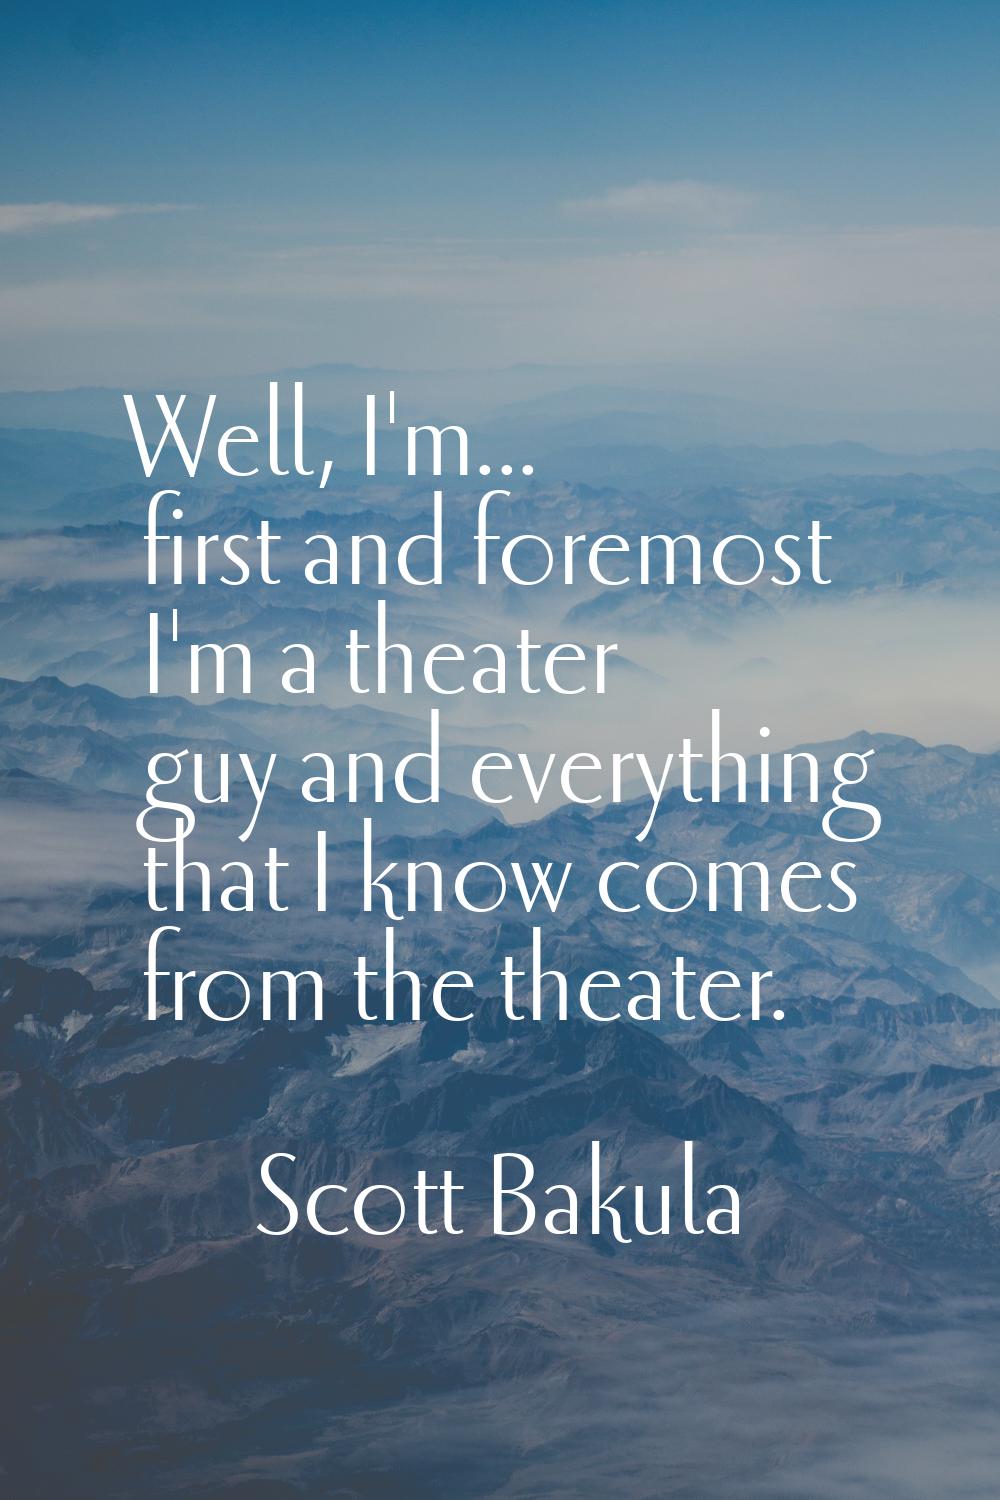 Well, I'm... first and foremost I'm a theater guy and everything that I know comes from the theater